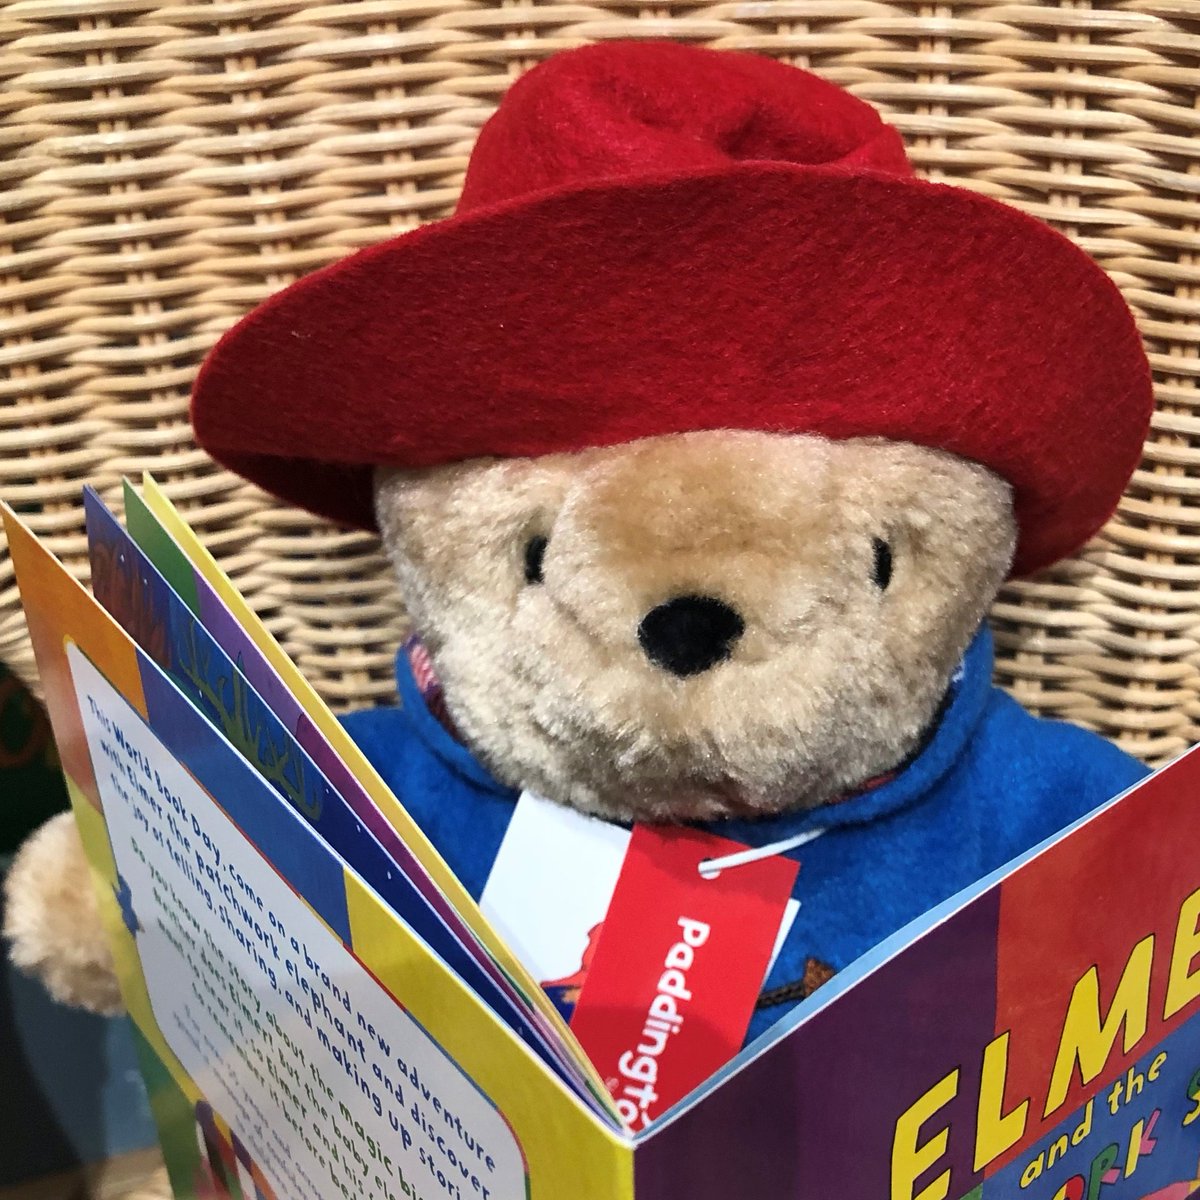 Hurrah the World Book Day books are here.@WorldBookDayUK When you get your vouchers from school come in and choose one Paddington is super excited with his choice!